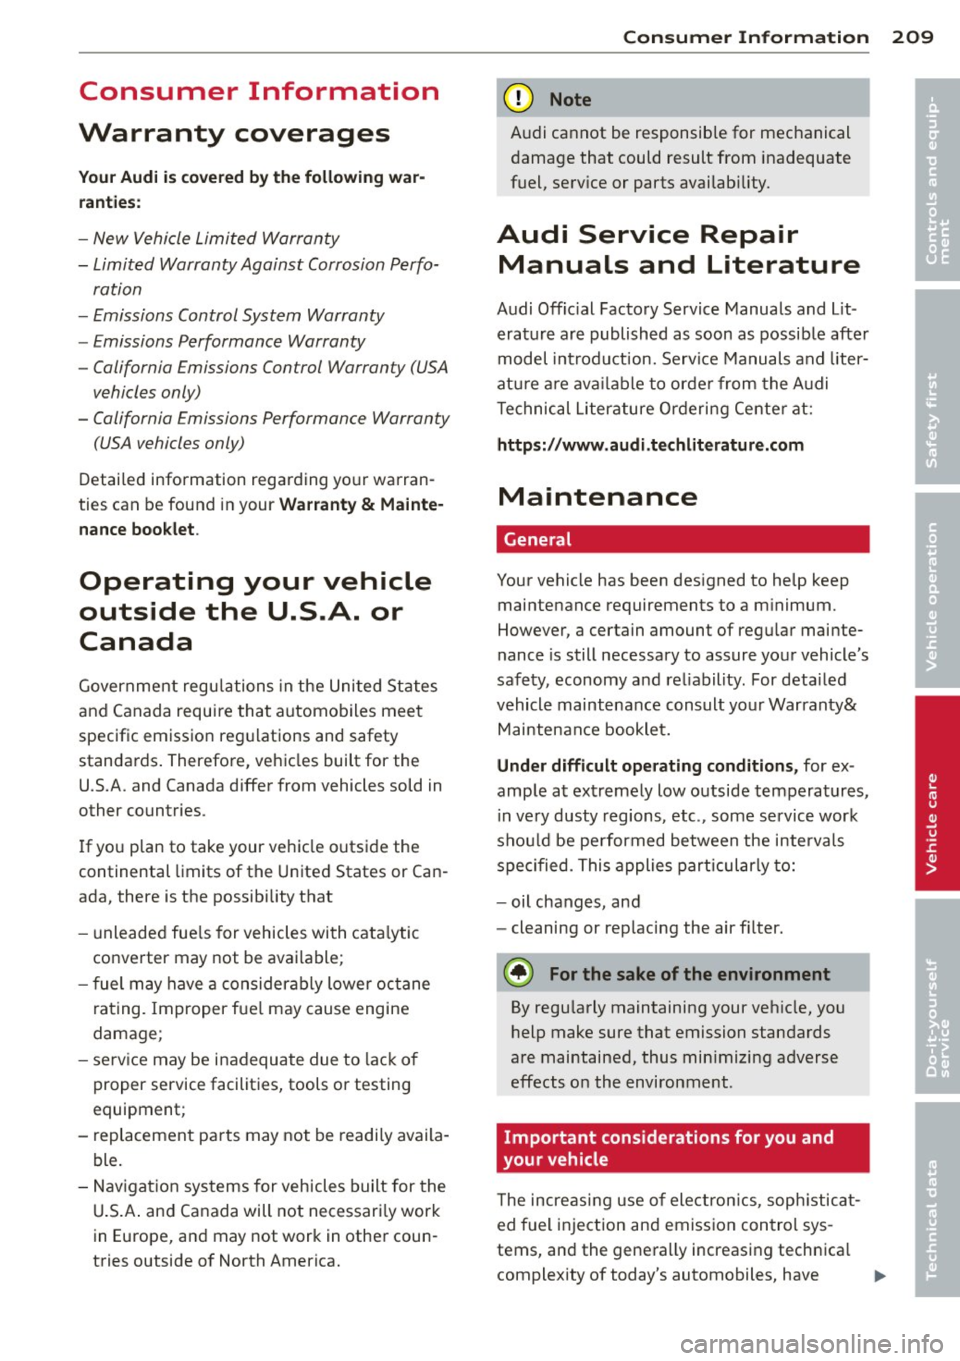 AUDI R8 SPYDER 2011  Owners Manual Consumer  Information 
Warranty  coverages 
Your Audi is  covered by the following  war­
ranties : 
-New  Vehicle  Limited  Warranty 
- Limited  Warranty  Against  Corrosion  Perfo-
ration 
- Emissio